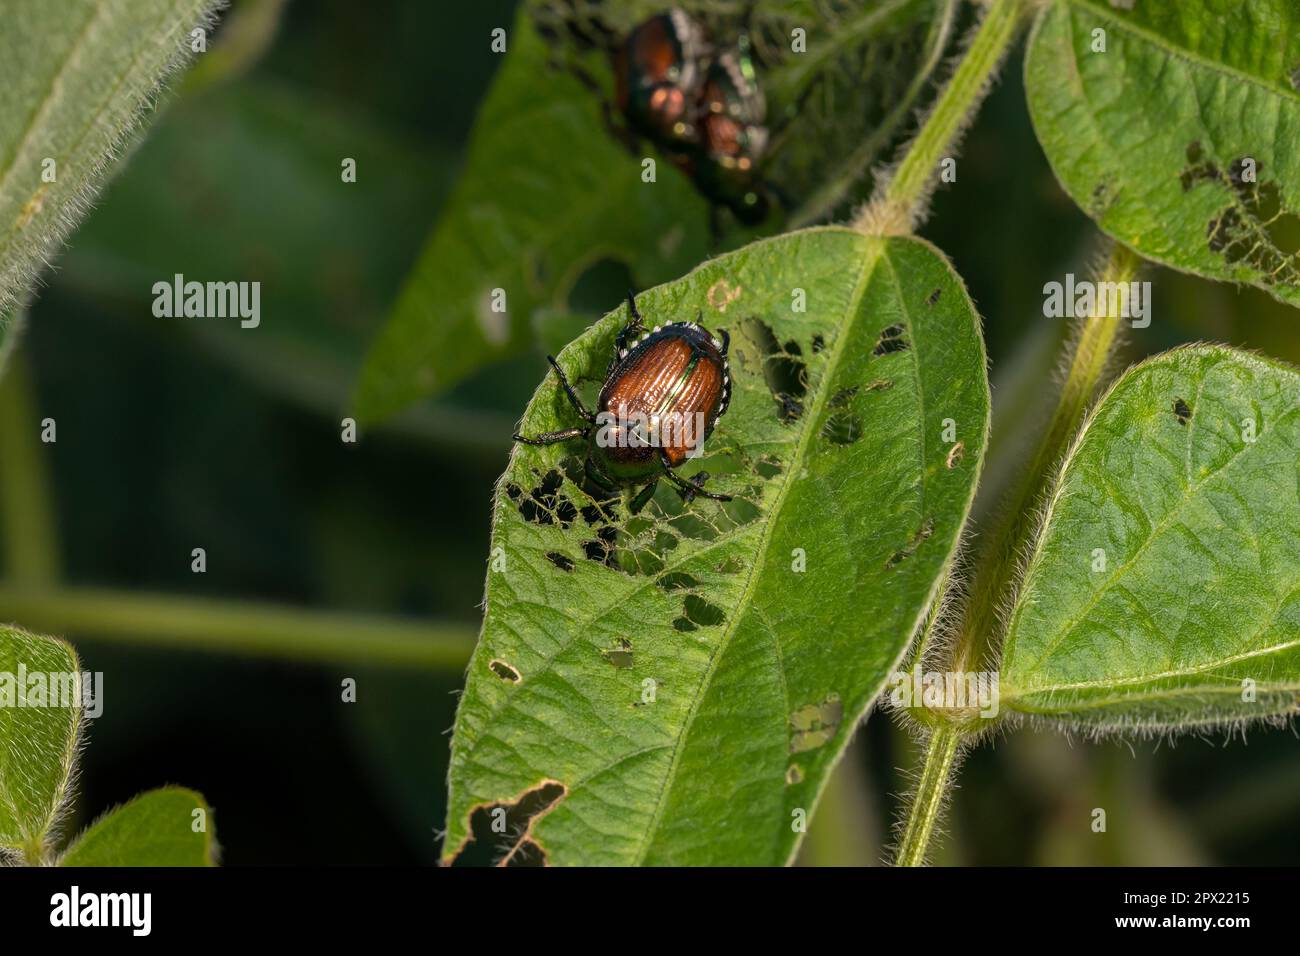 Japanese beetle eating leaf of soybean plant. Agriculture insects, pest control and crop damage concept. Stock Photo